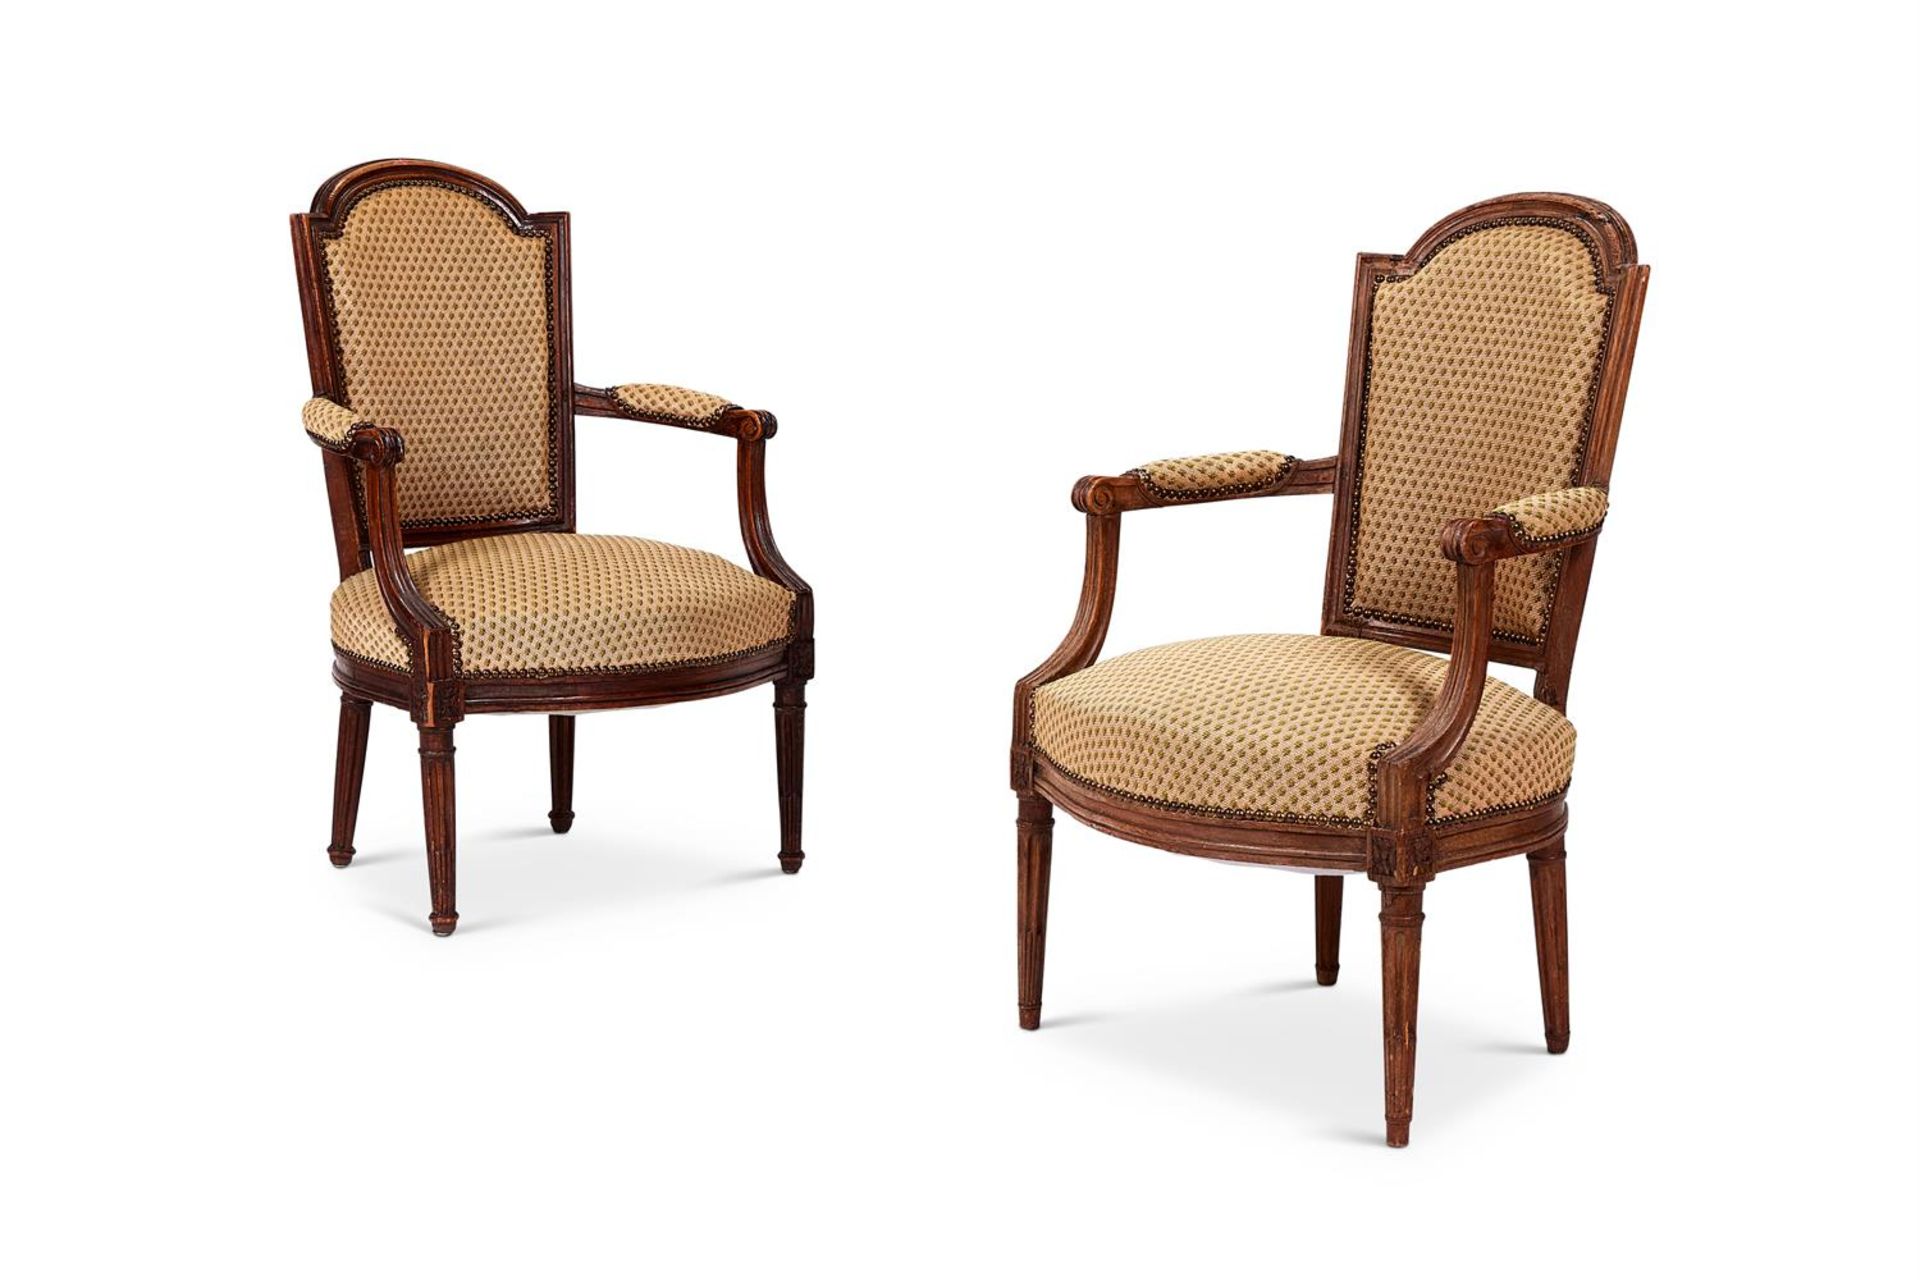 A MATCHED PAIR OF FRENCH WALNUT FAUTEUILS, 19TH CENTURY